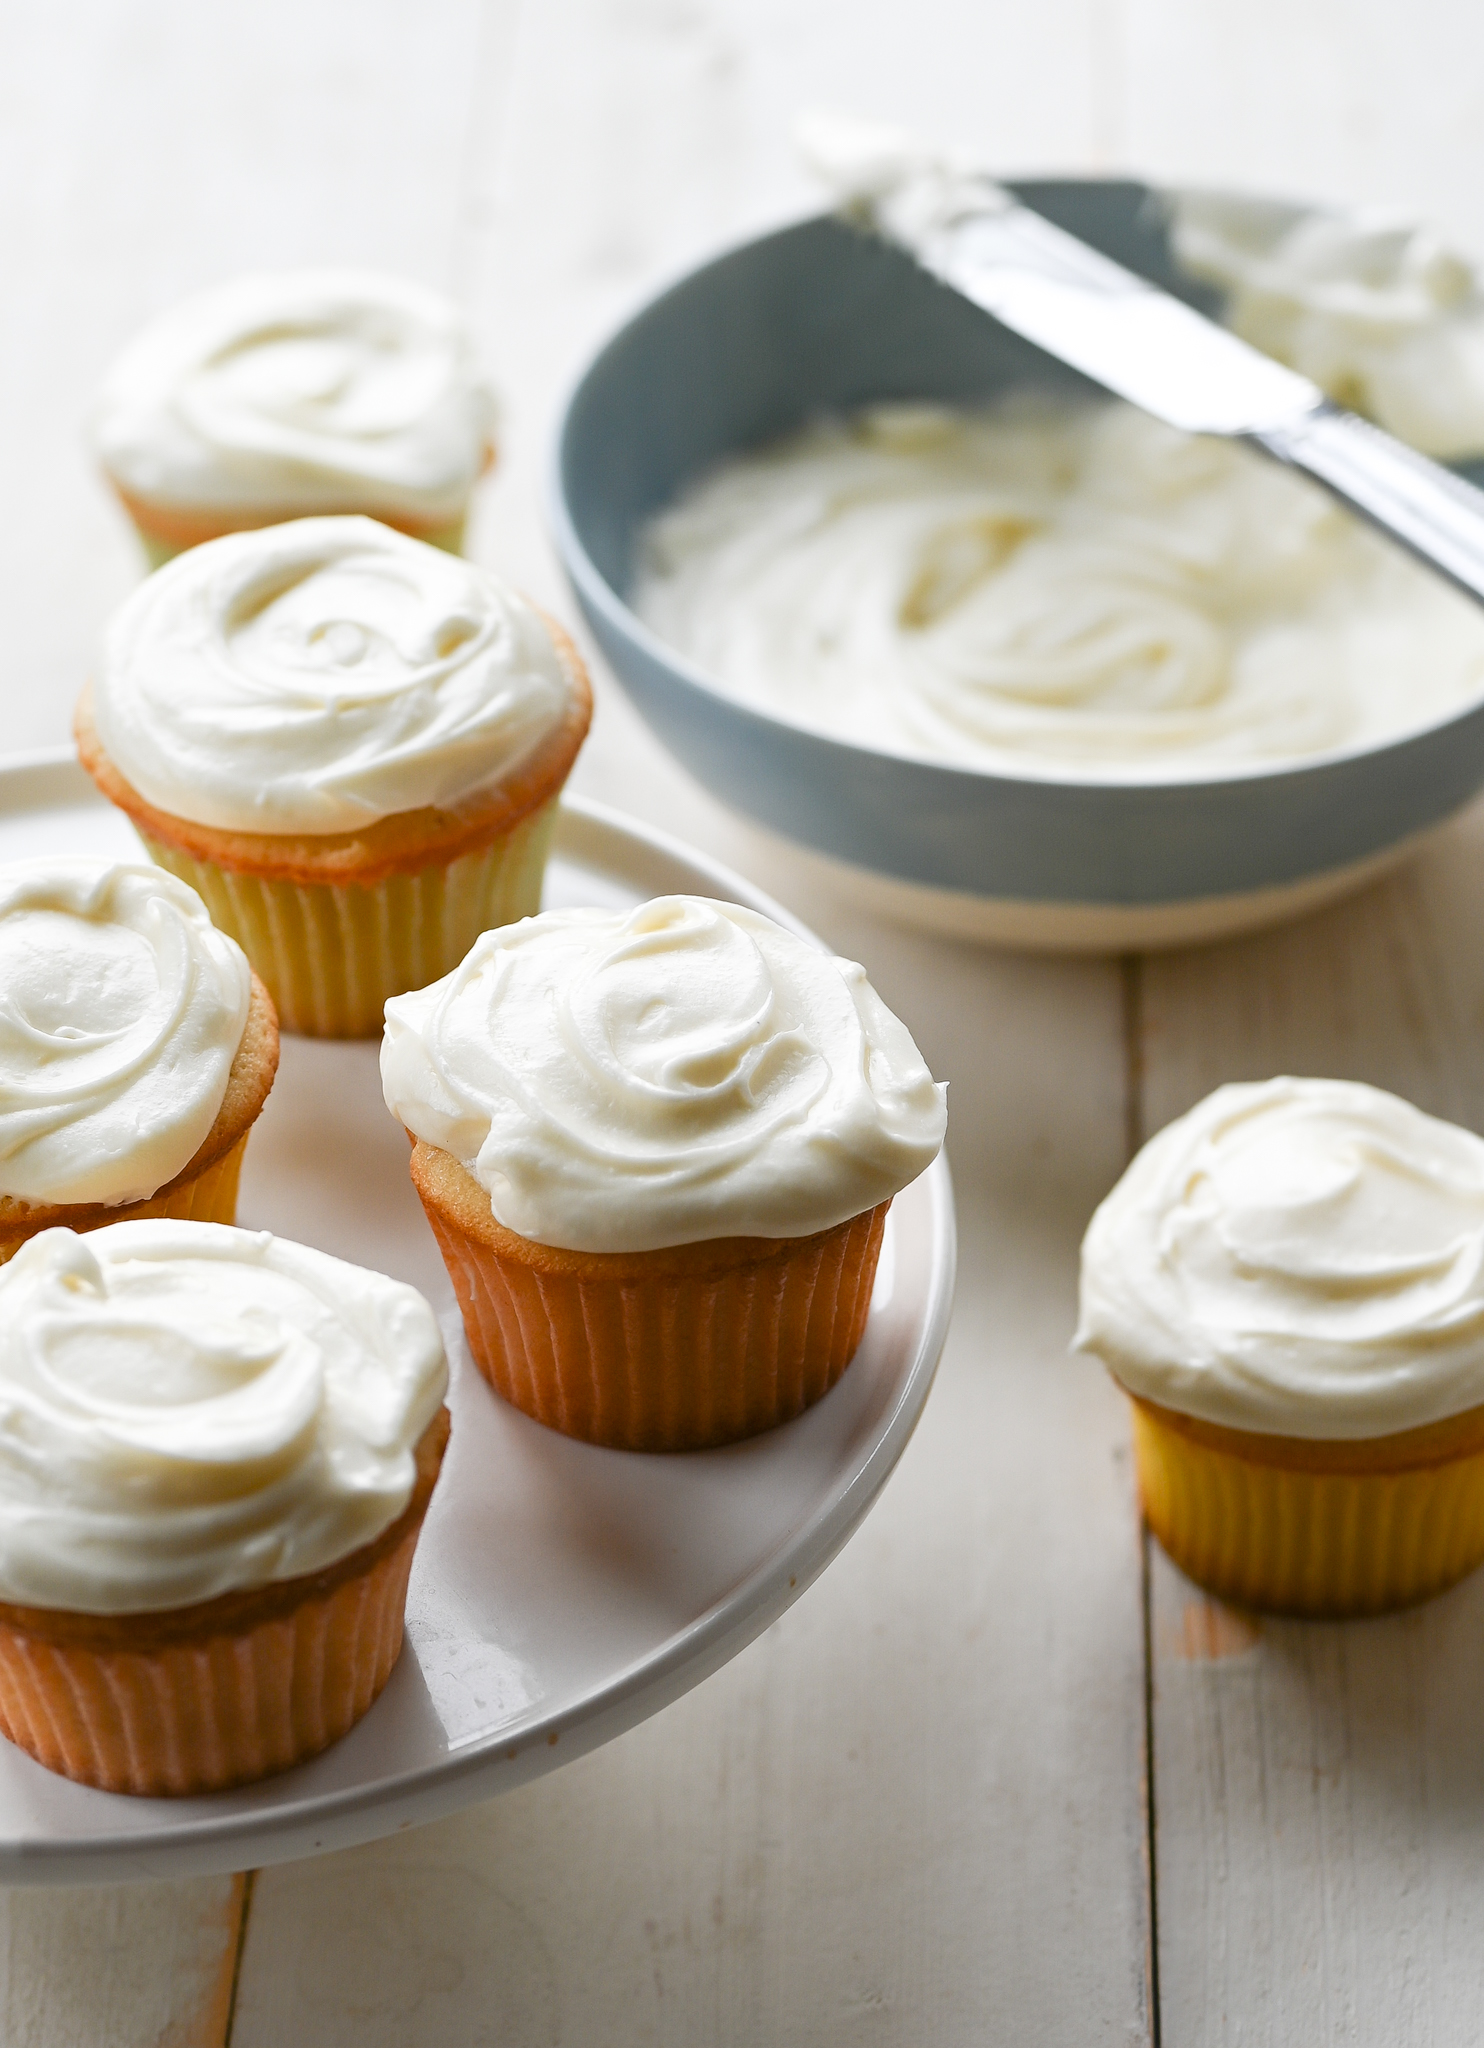 https://www.onceuponachef.com/images/2022/05/cream-cheese-frosting.jpg